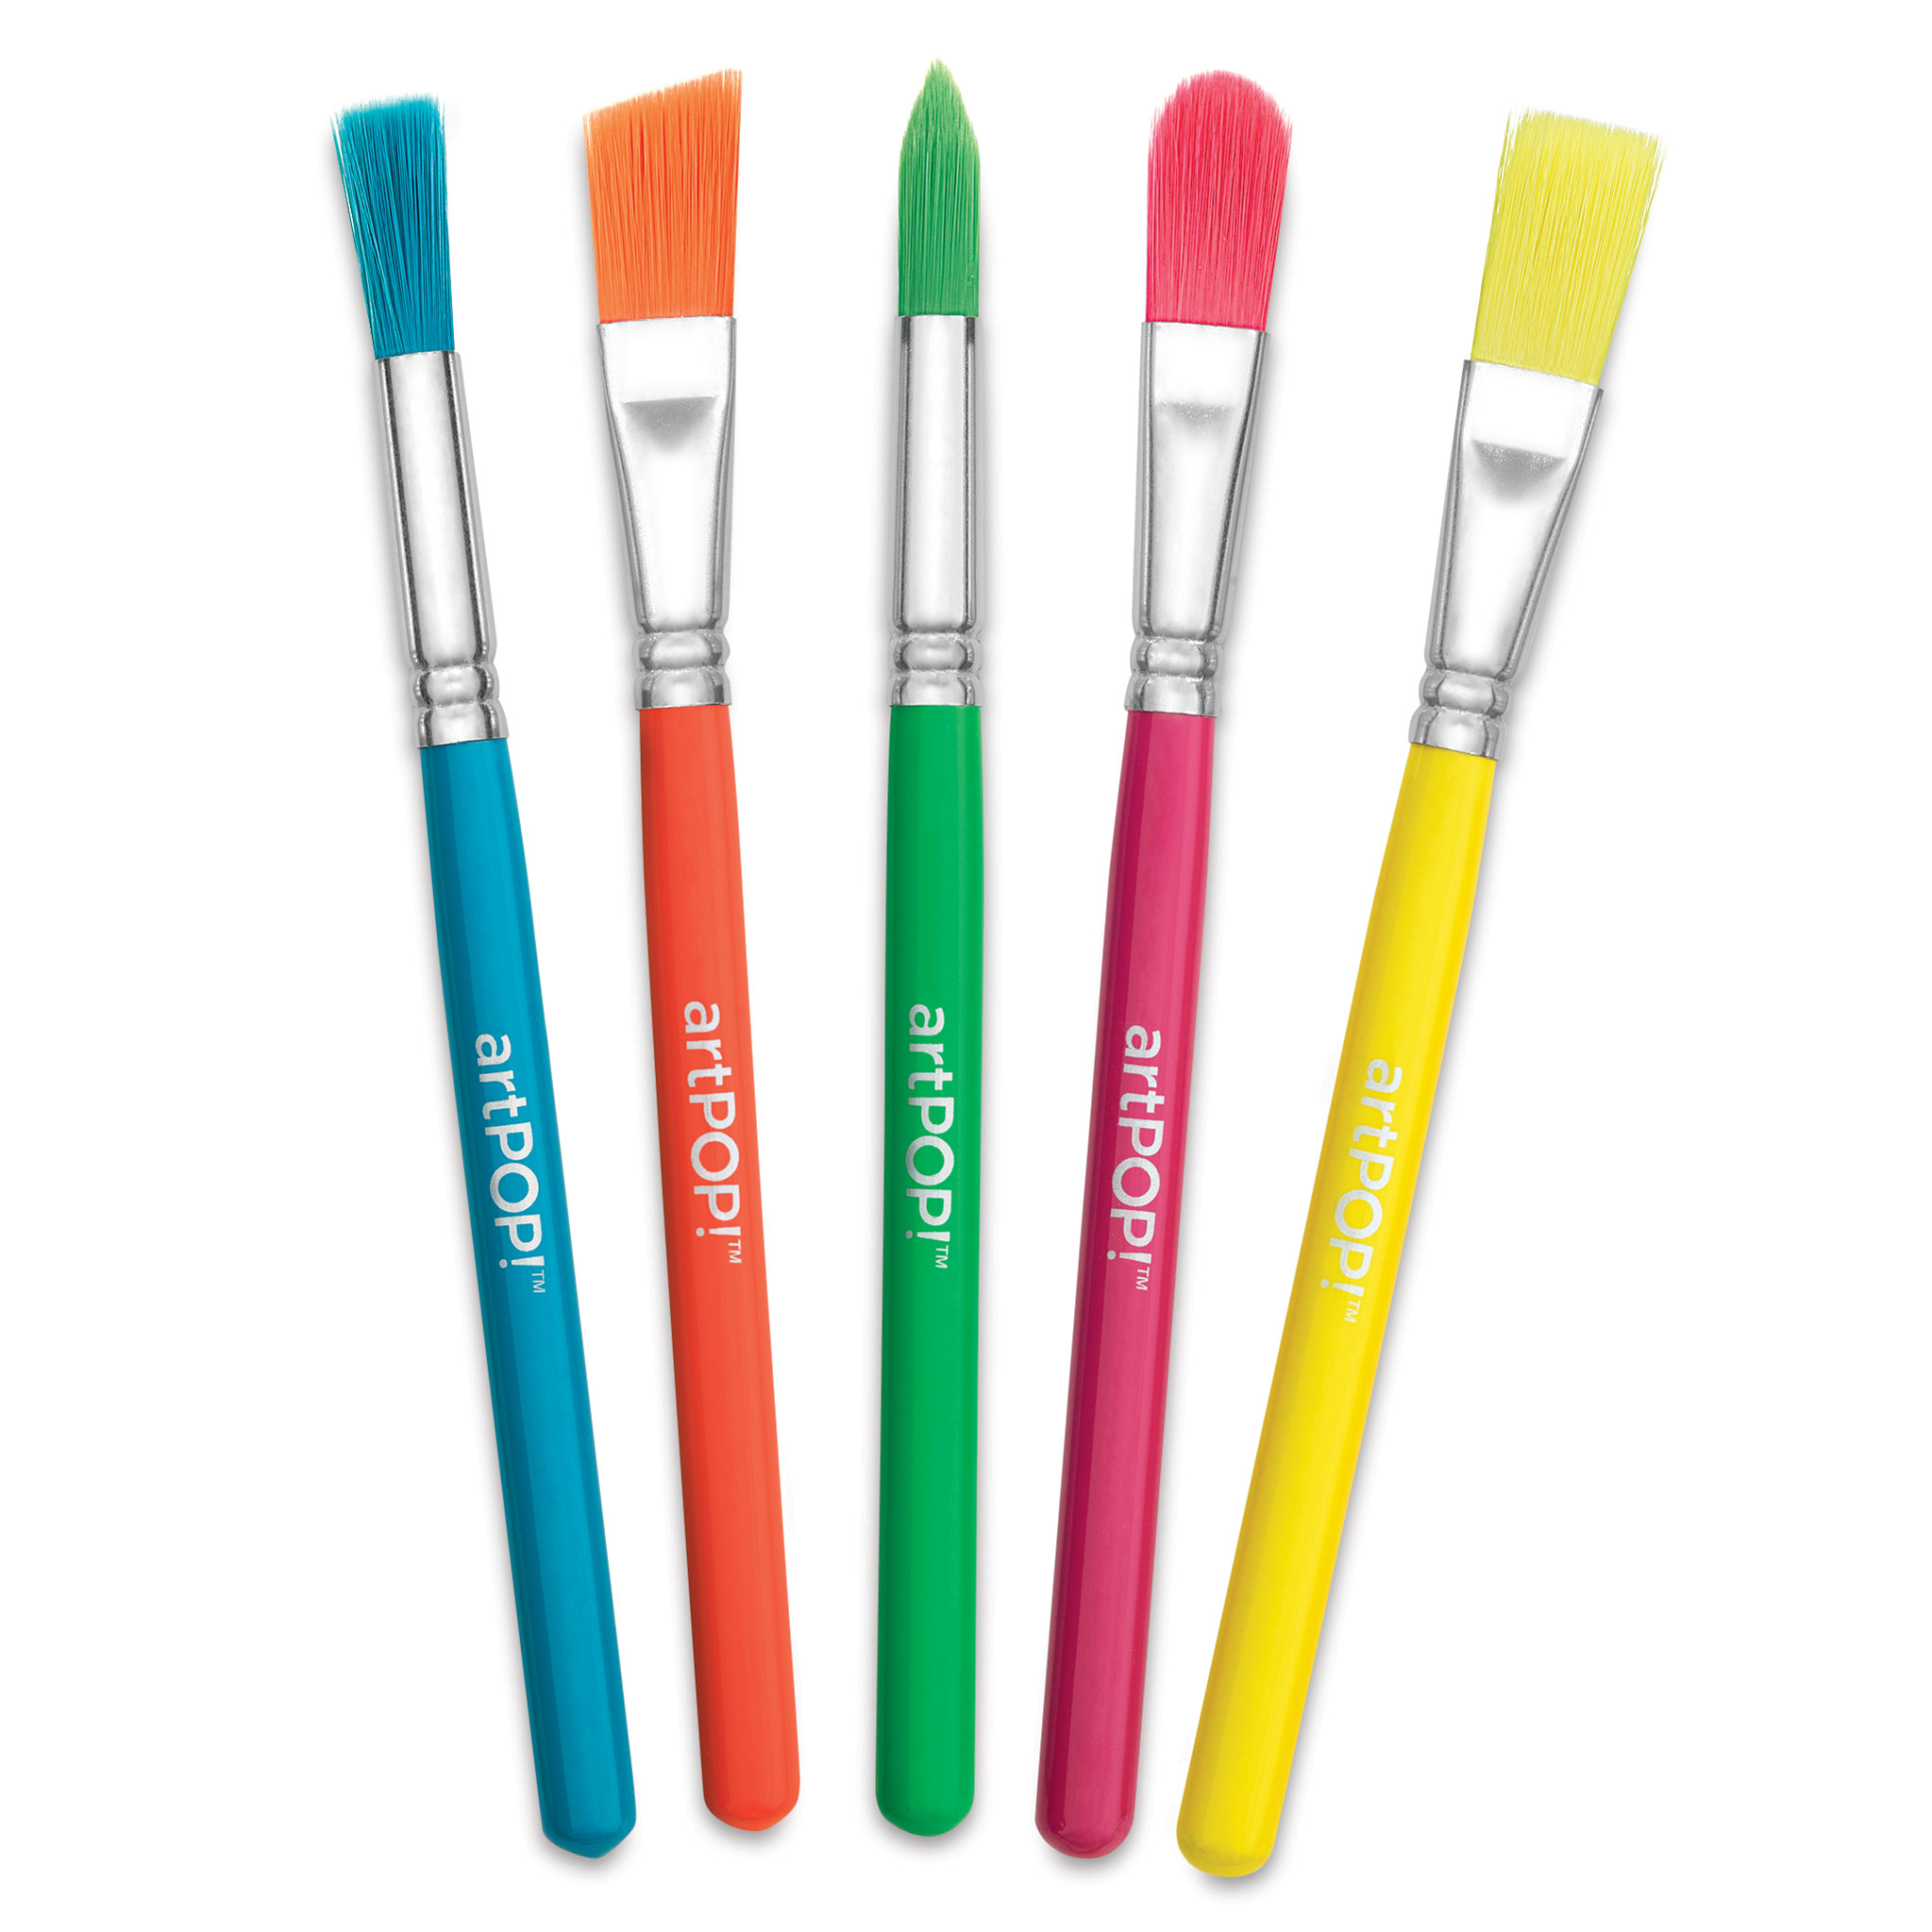 Craft Paint Brushes. Buy Paint Brushes from Royal Brush and Loew Cornell